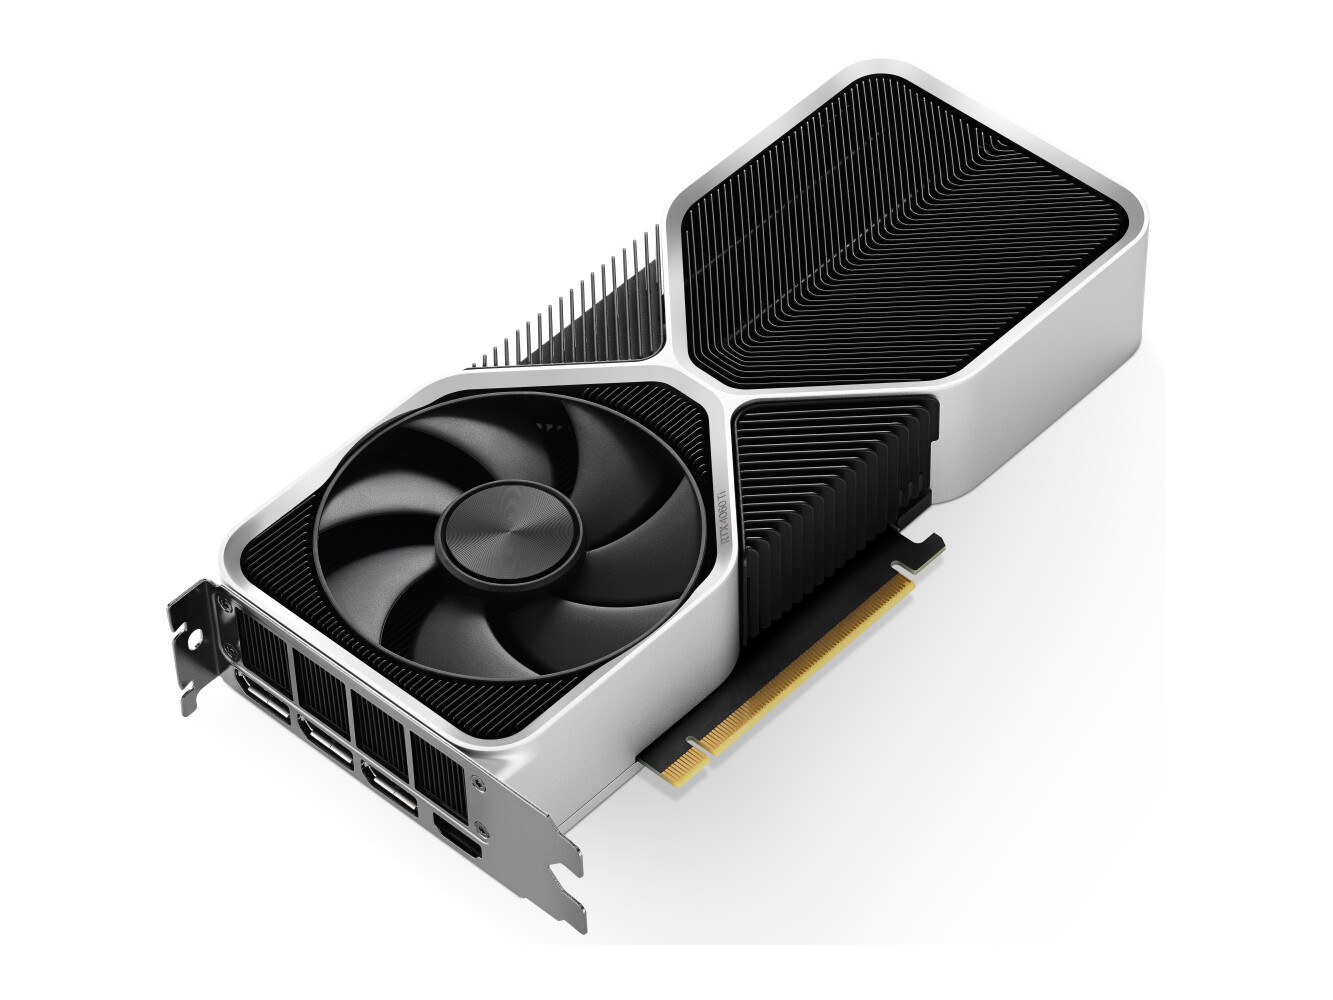 A Broader Look At NVIDIA's GeForce RTX 4060 Ti Founders Edition